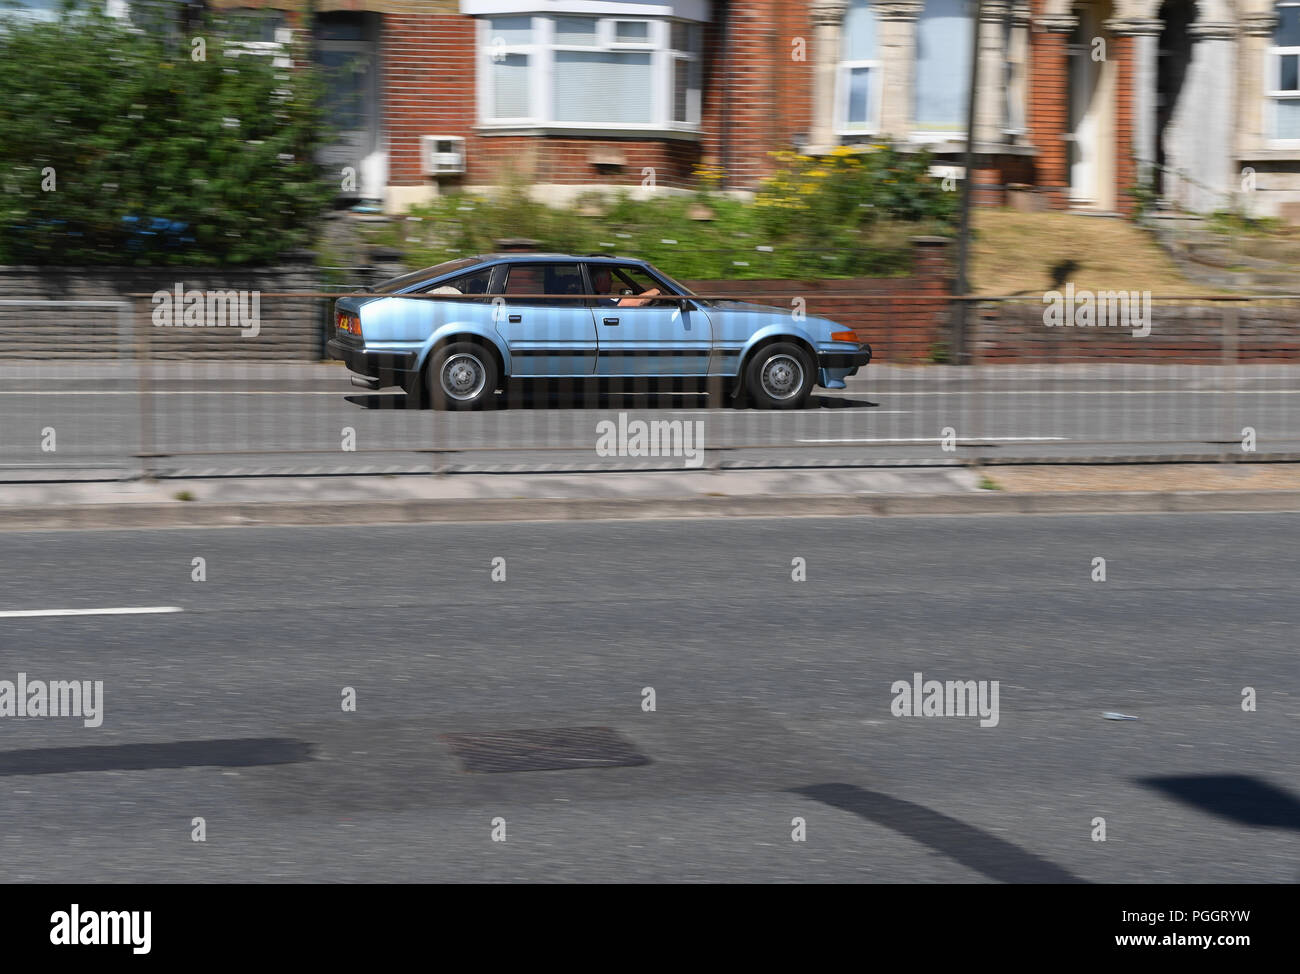 A classic light blue British leyland Rover Vitesse car driving along a dual carriage way. Stock Photo